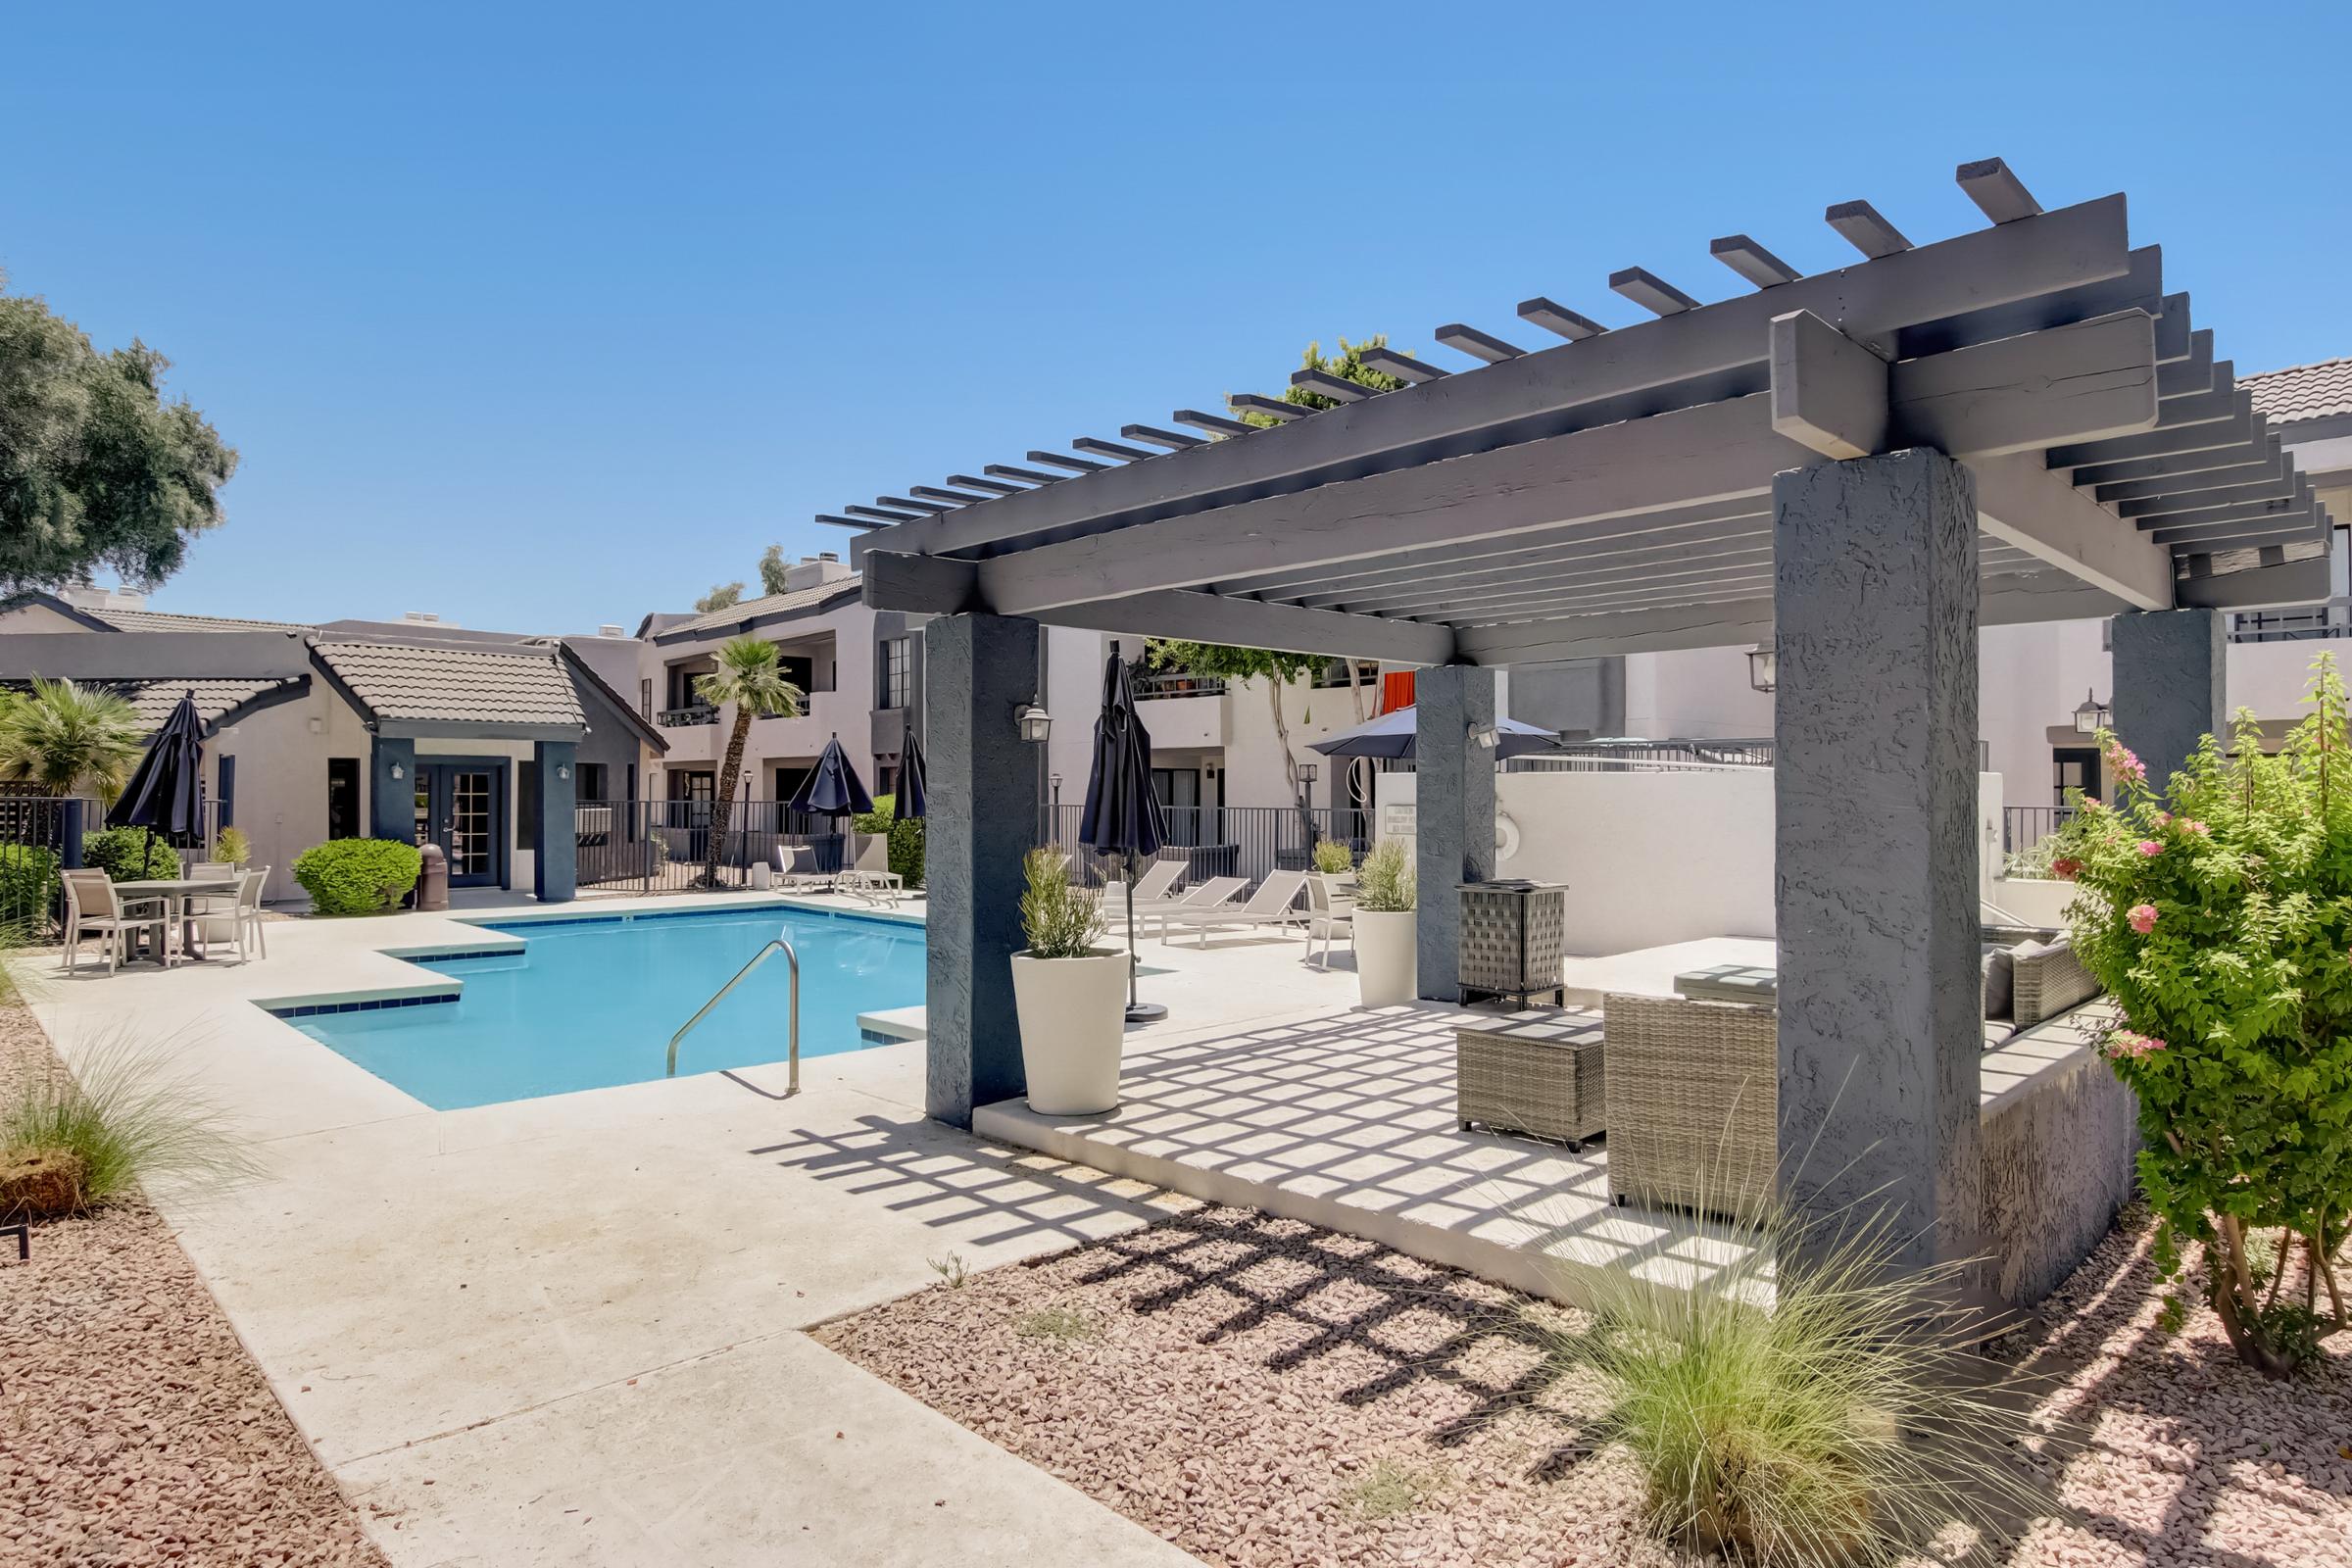 Rise on Cactus outdoor swimming pool and veranda in the middle of their Phoenix, AZ apartments